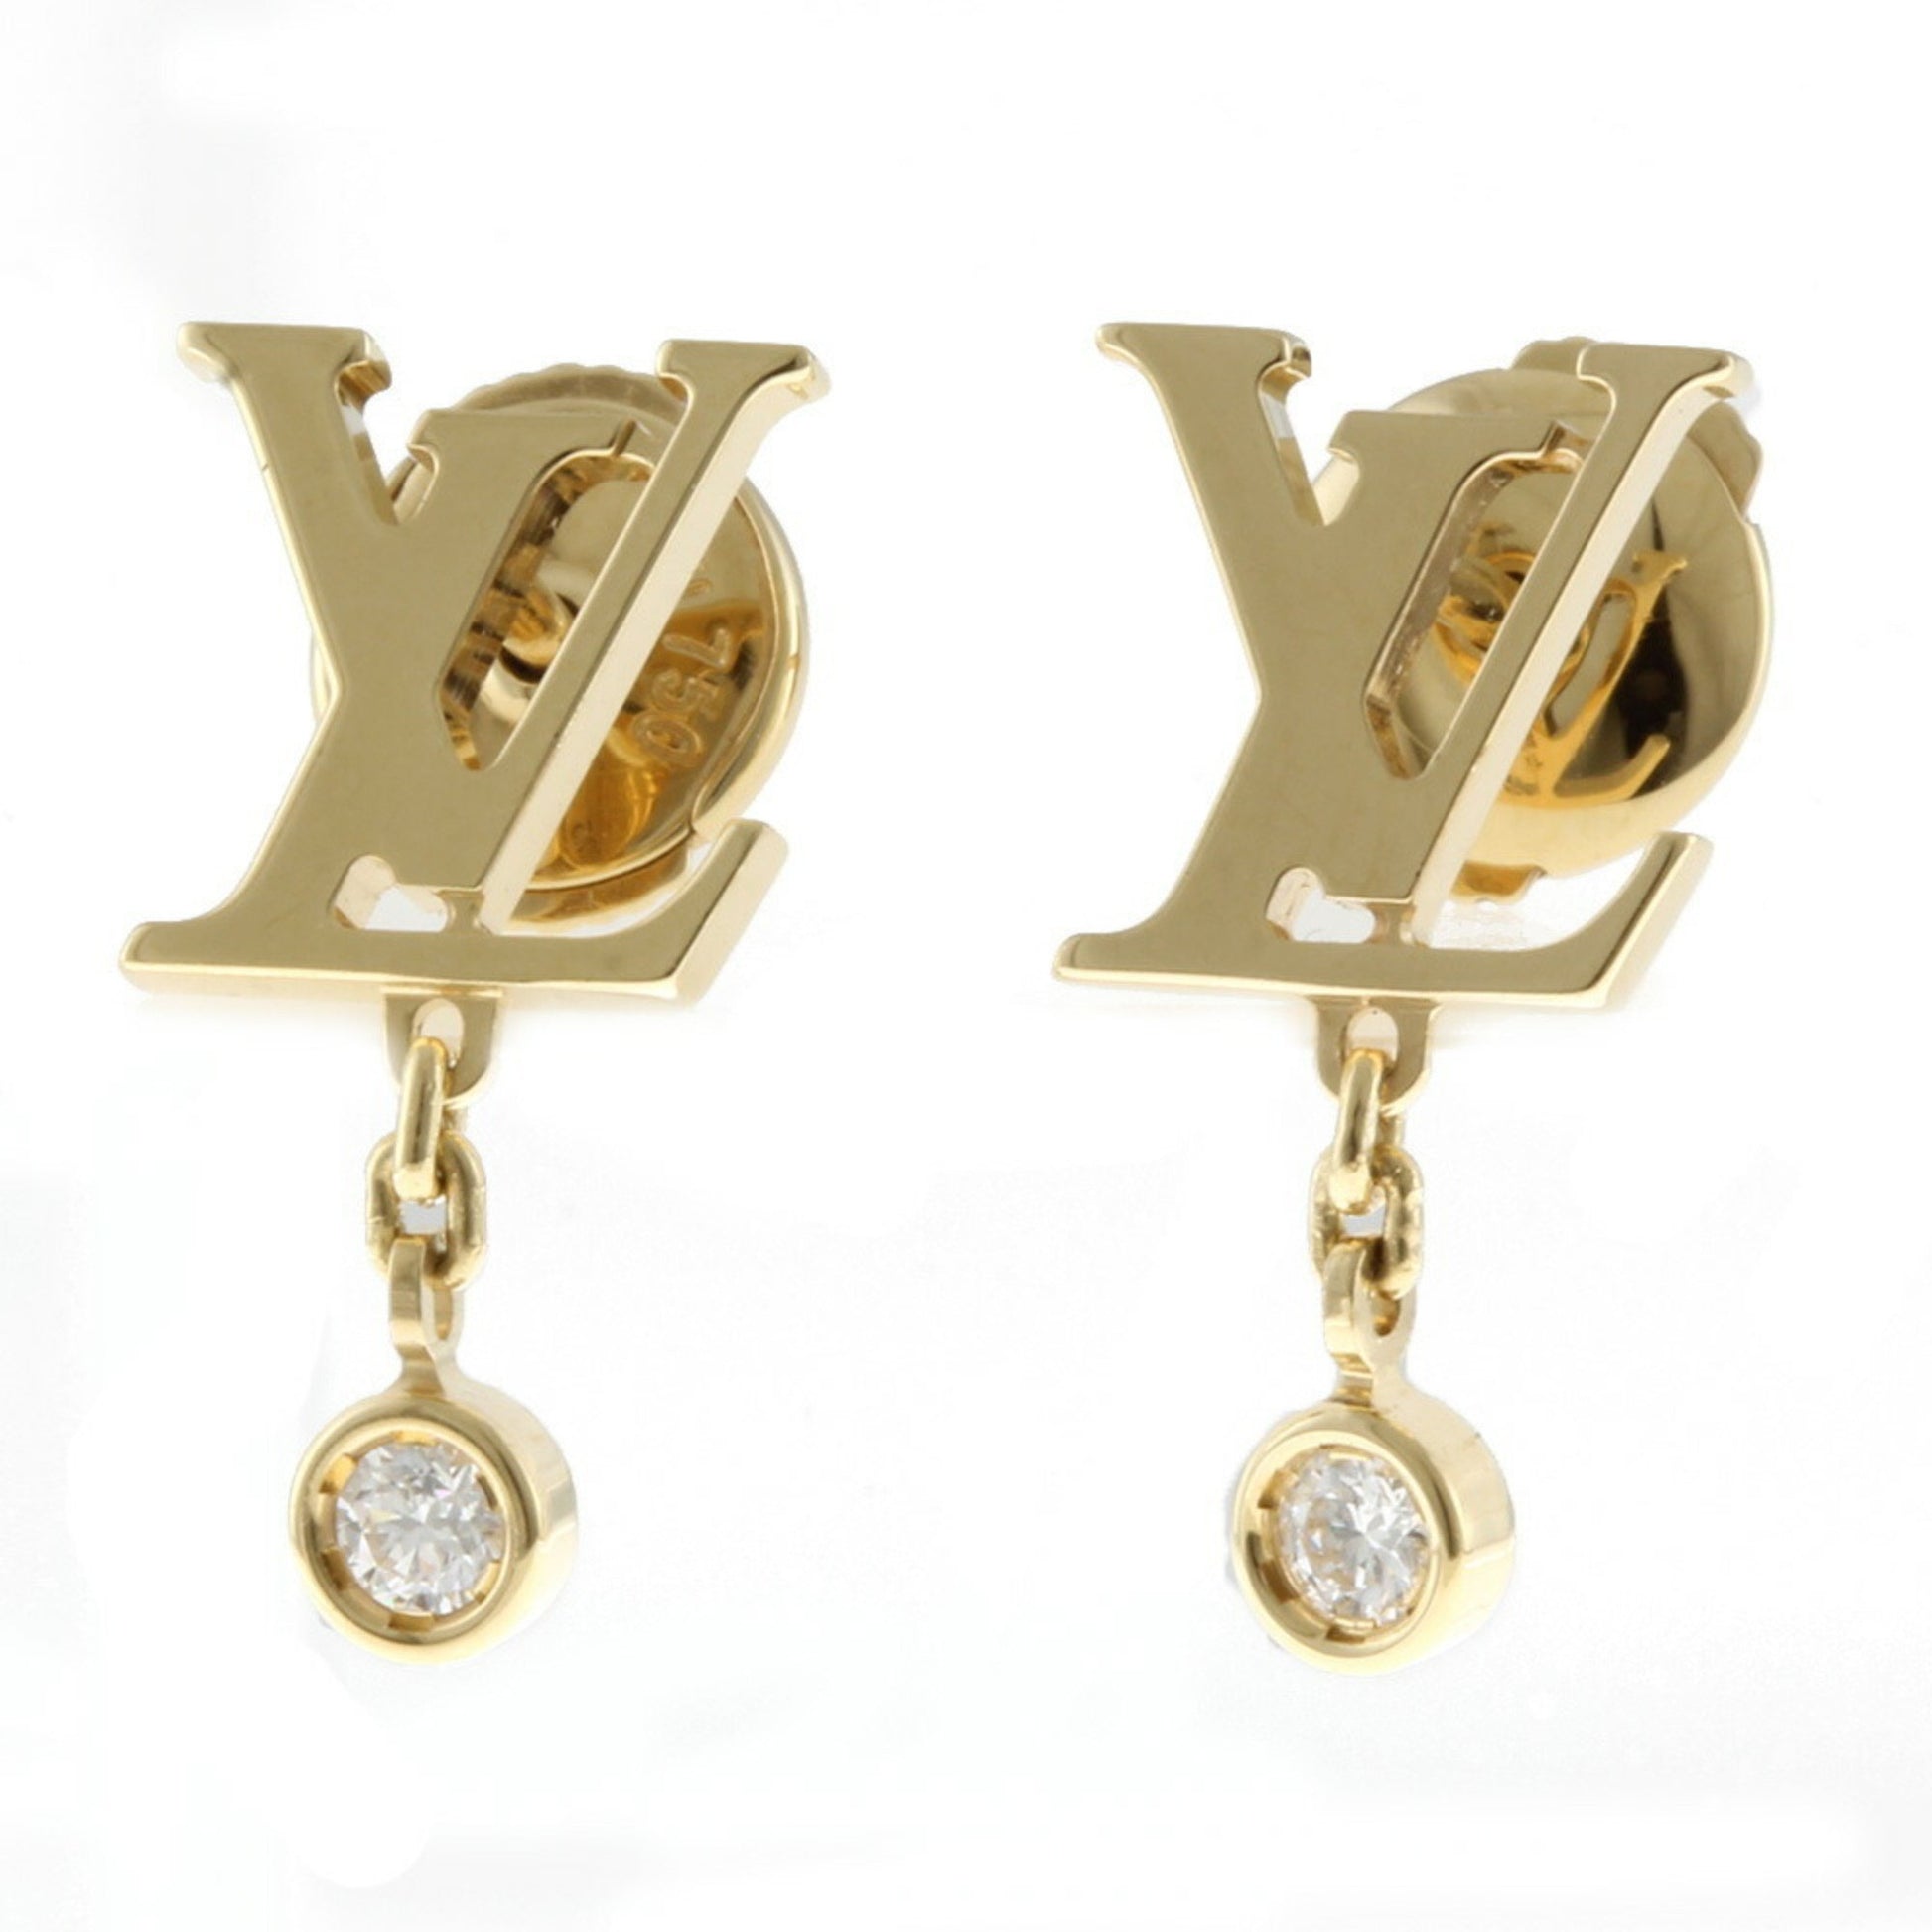 Louis Vuitton - Authenticated Earrings - Metal Gold For Woman, Never Worn